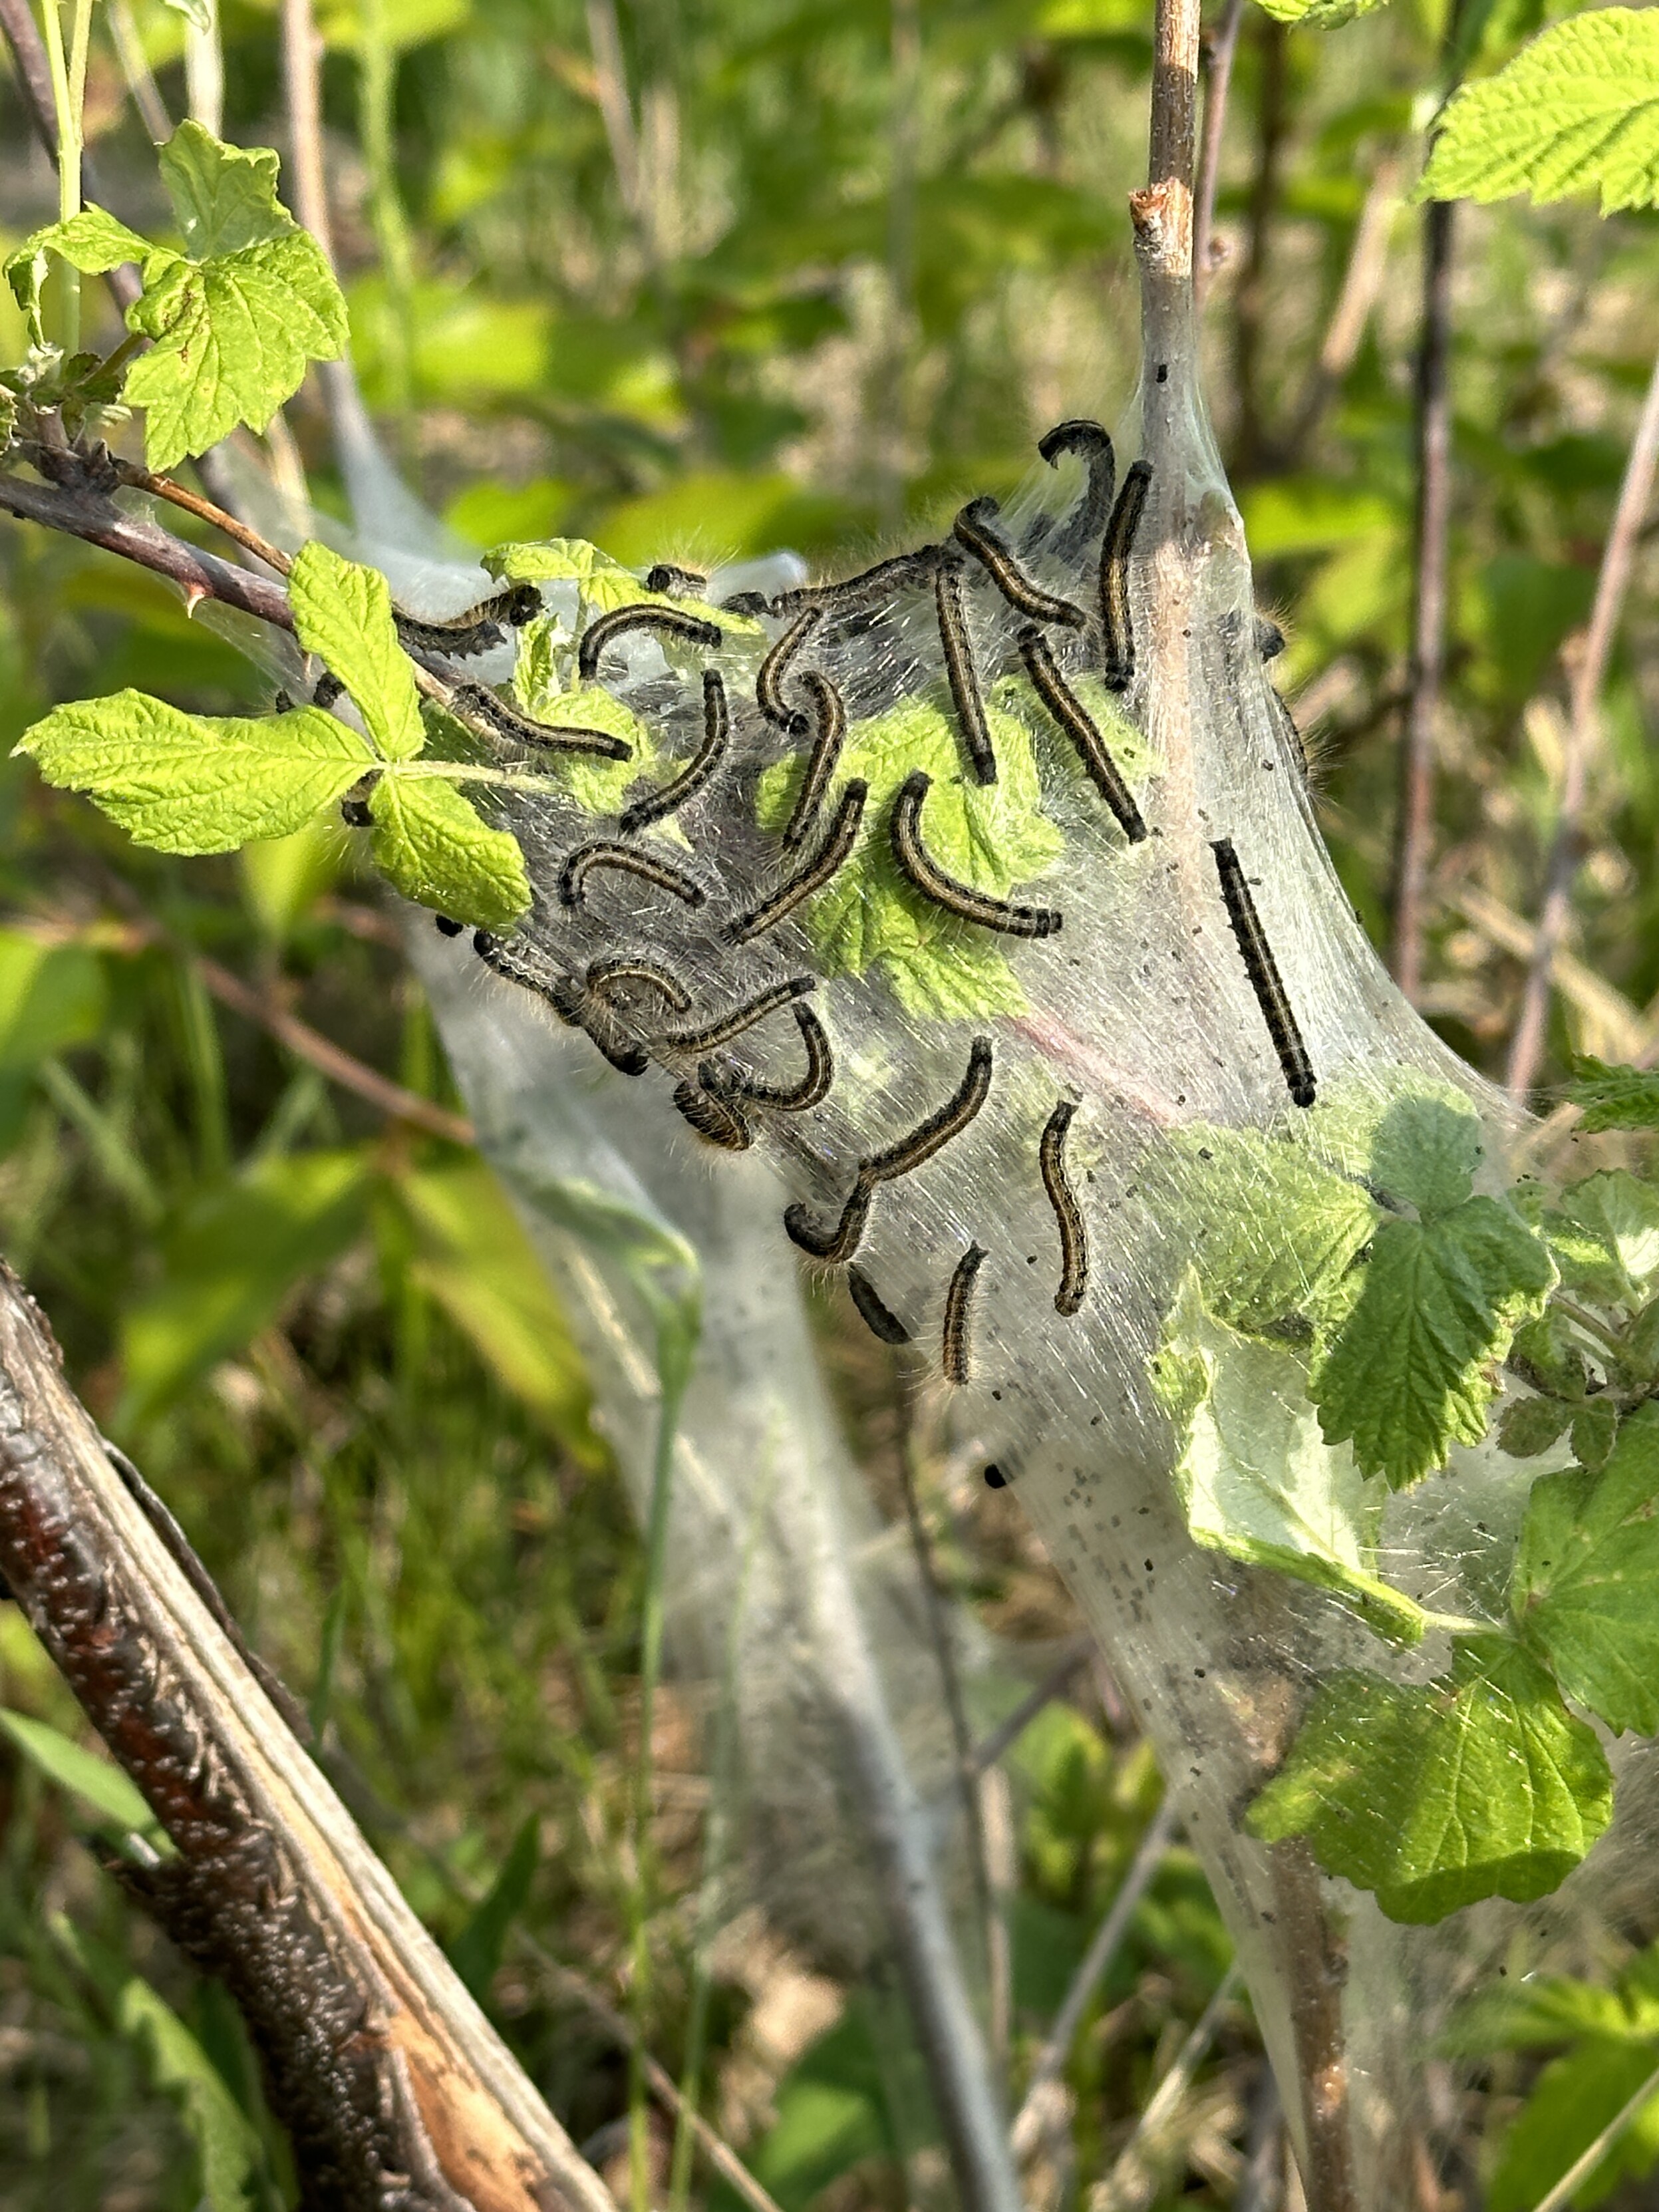 Giant web/cocoon thing covered in what might be cabbage moth caterpillars?